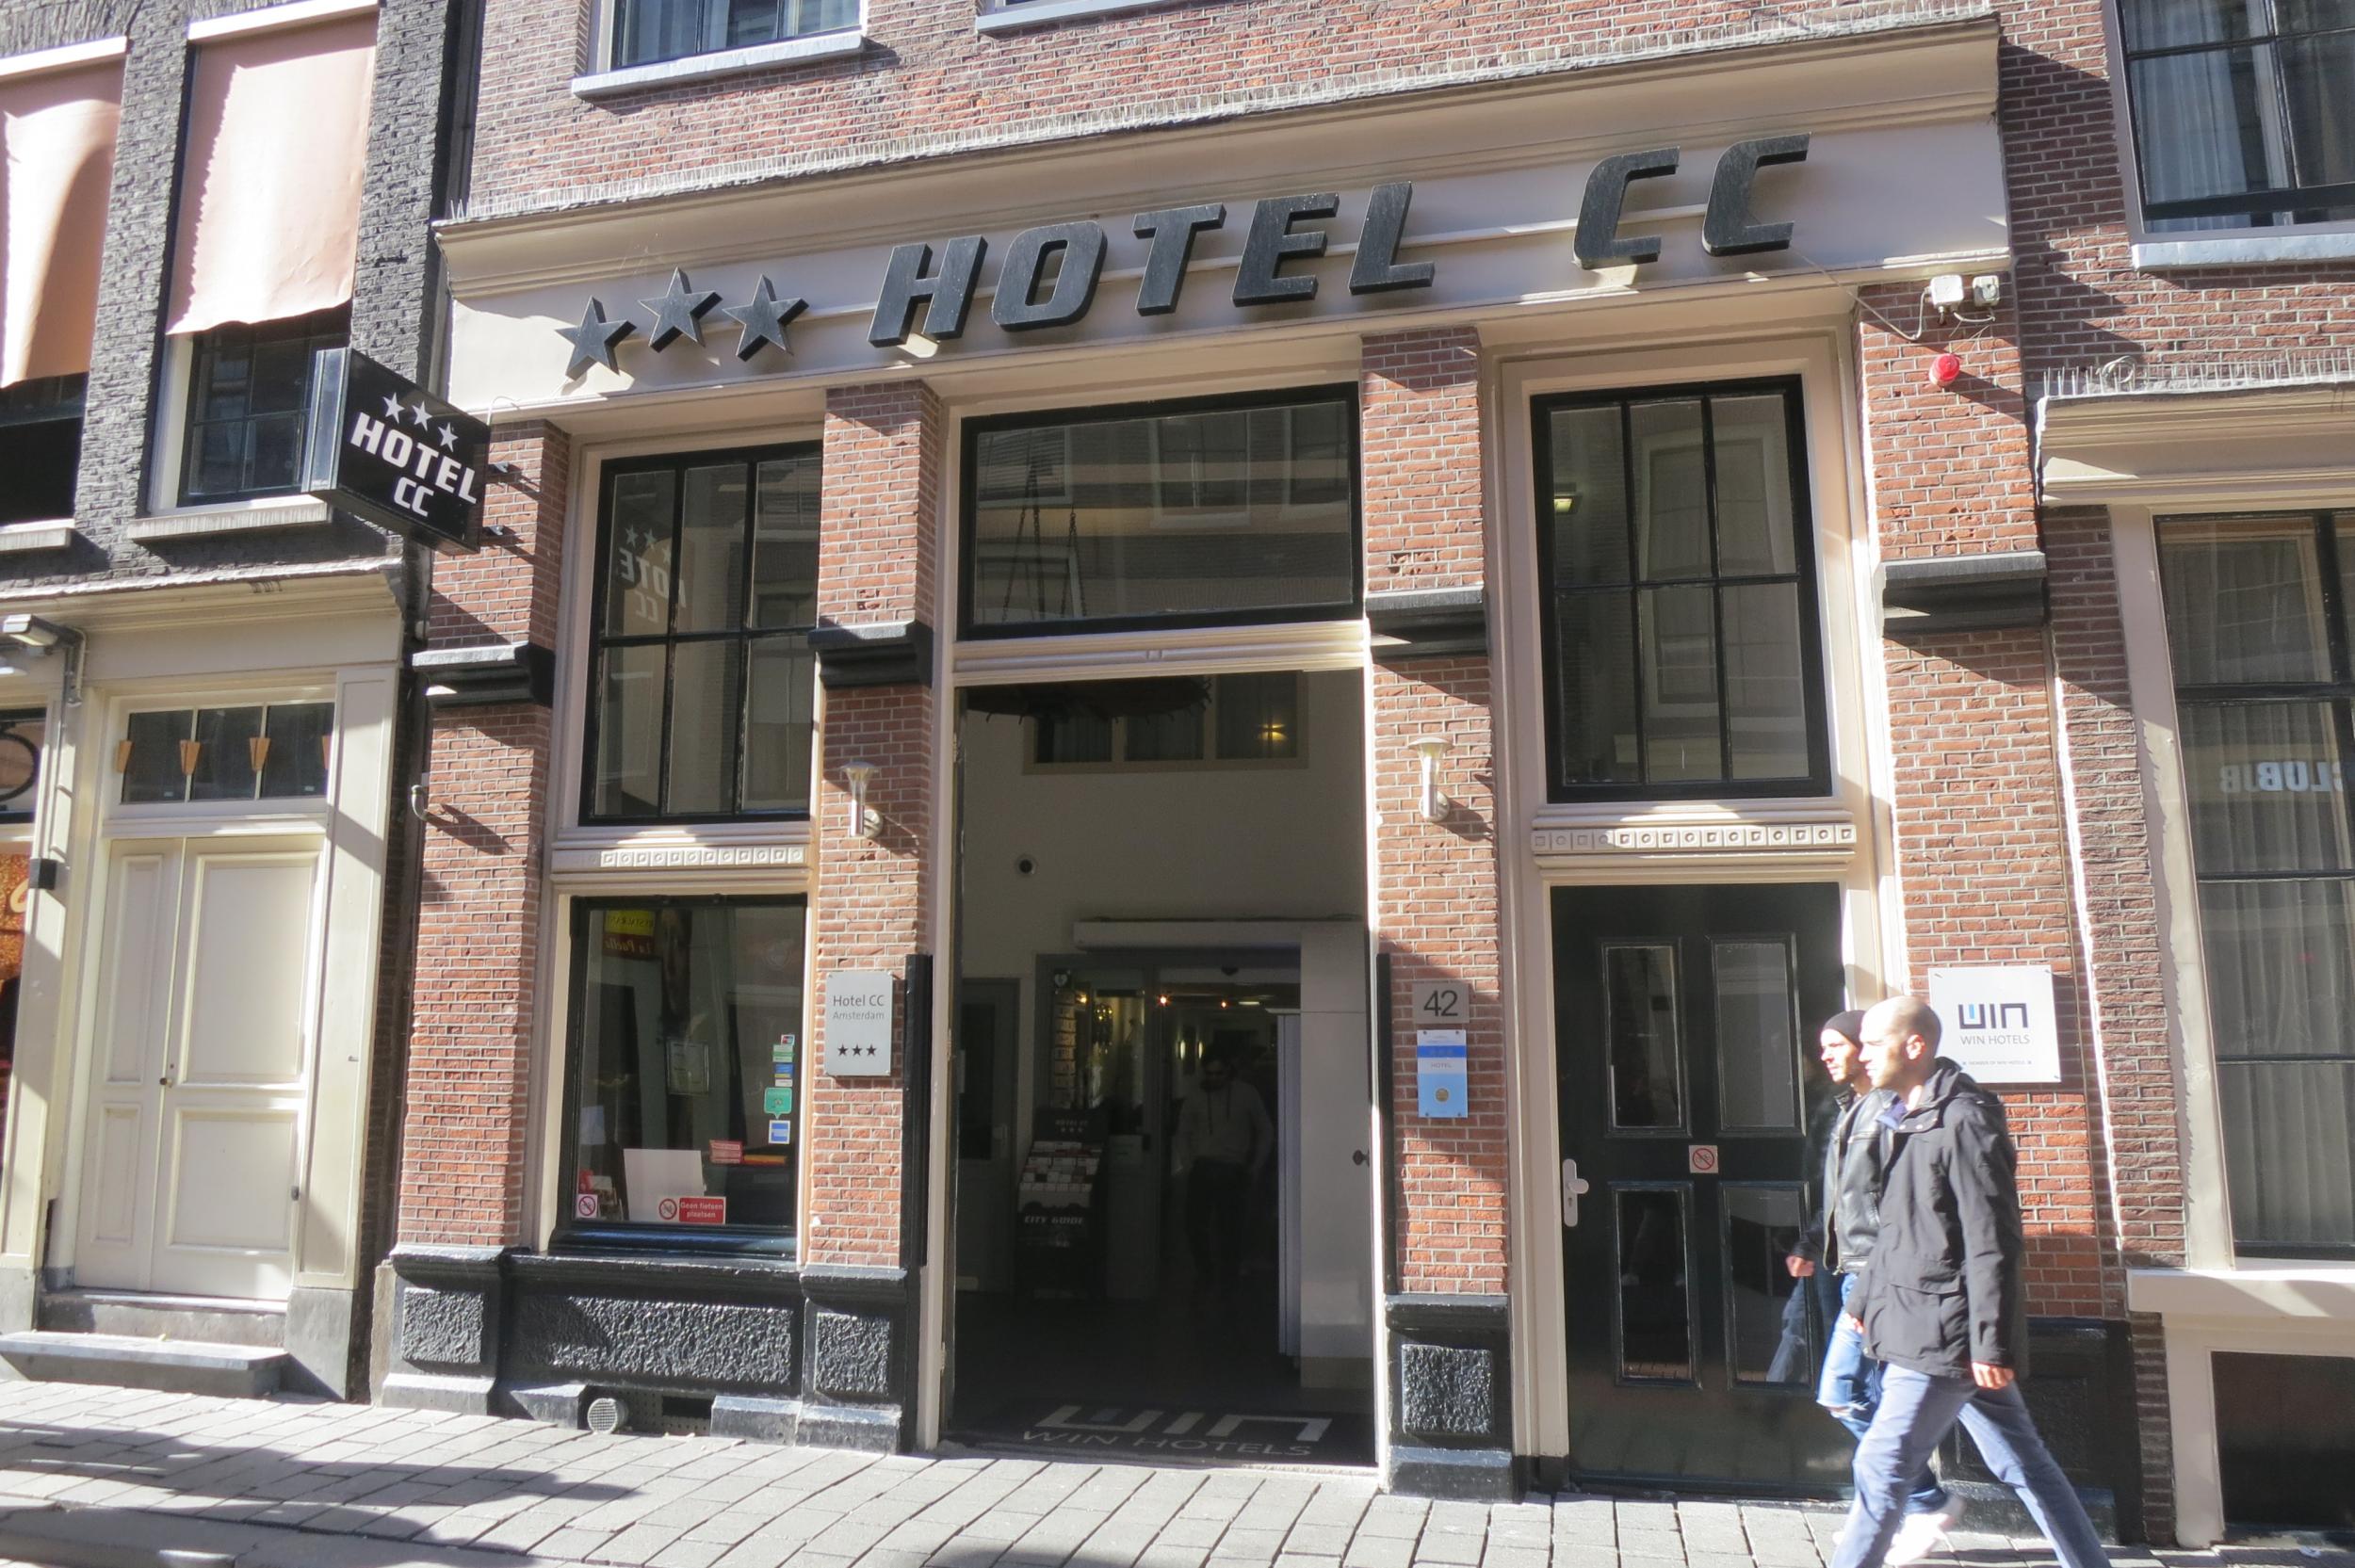 Visiting Amsterdam for the sesh? Hotel CC is at the heart of the action